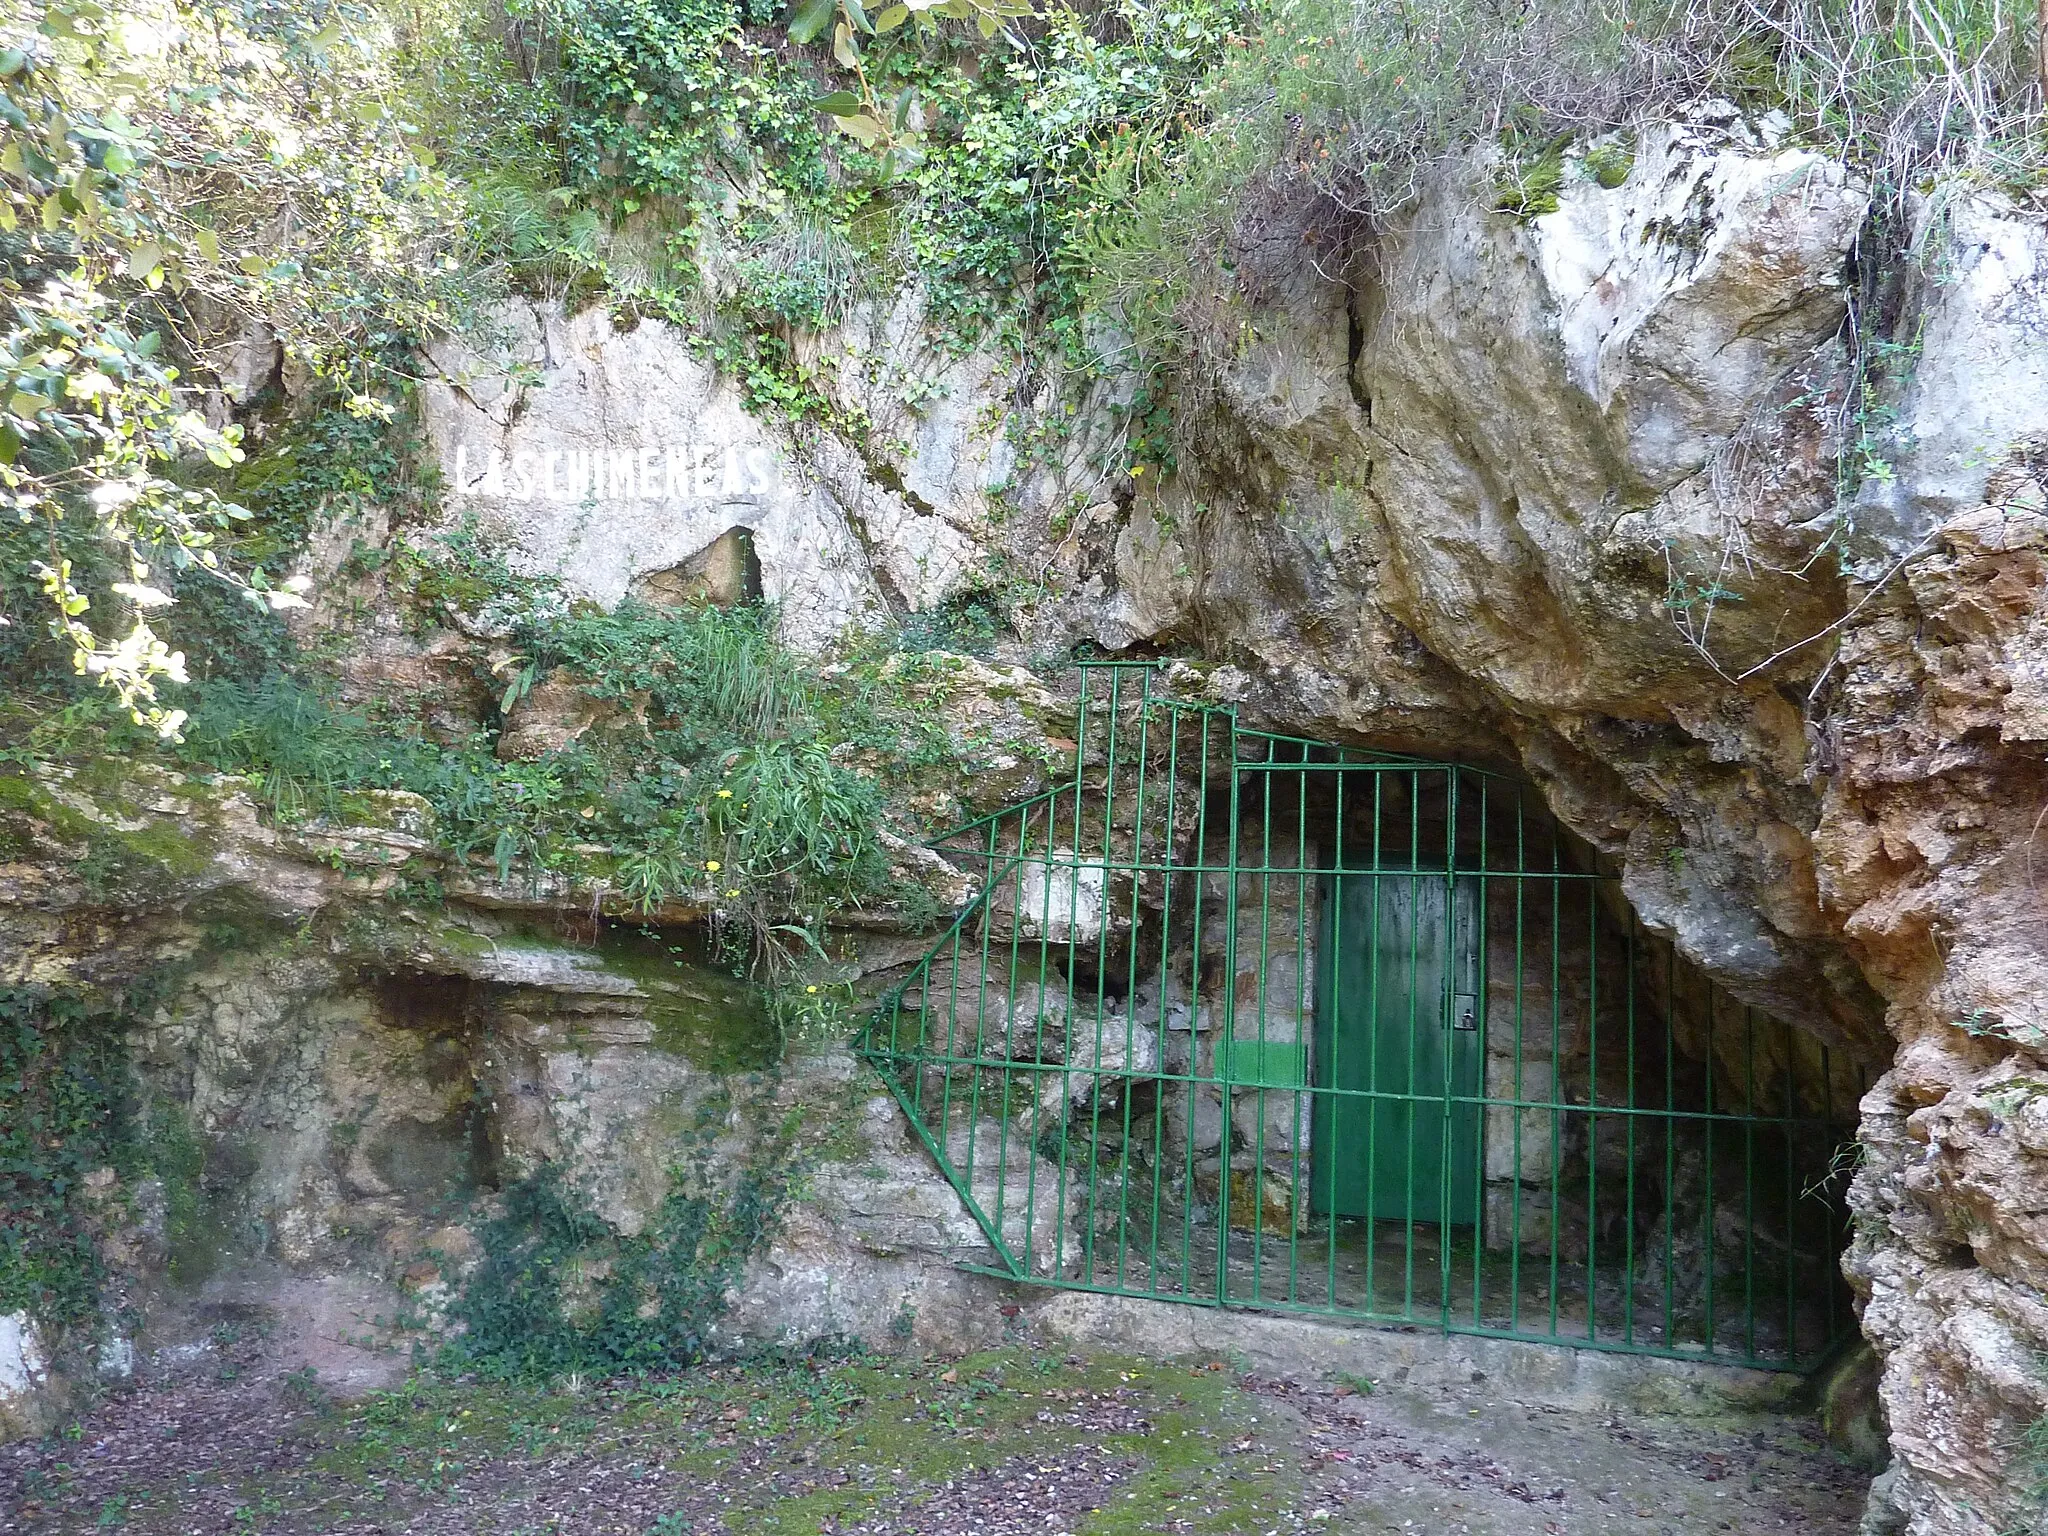 Photo showing: Cueva.

This is a photo of a monument indexed in the Spanish heritage register of Bienes de Interés Cultural under the reference RI-51-0004287-00002.